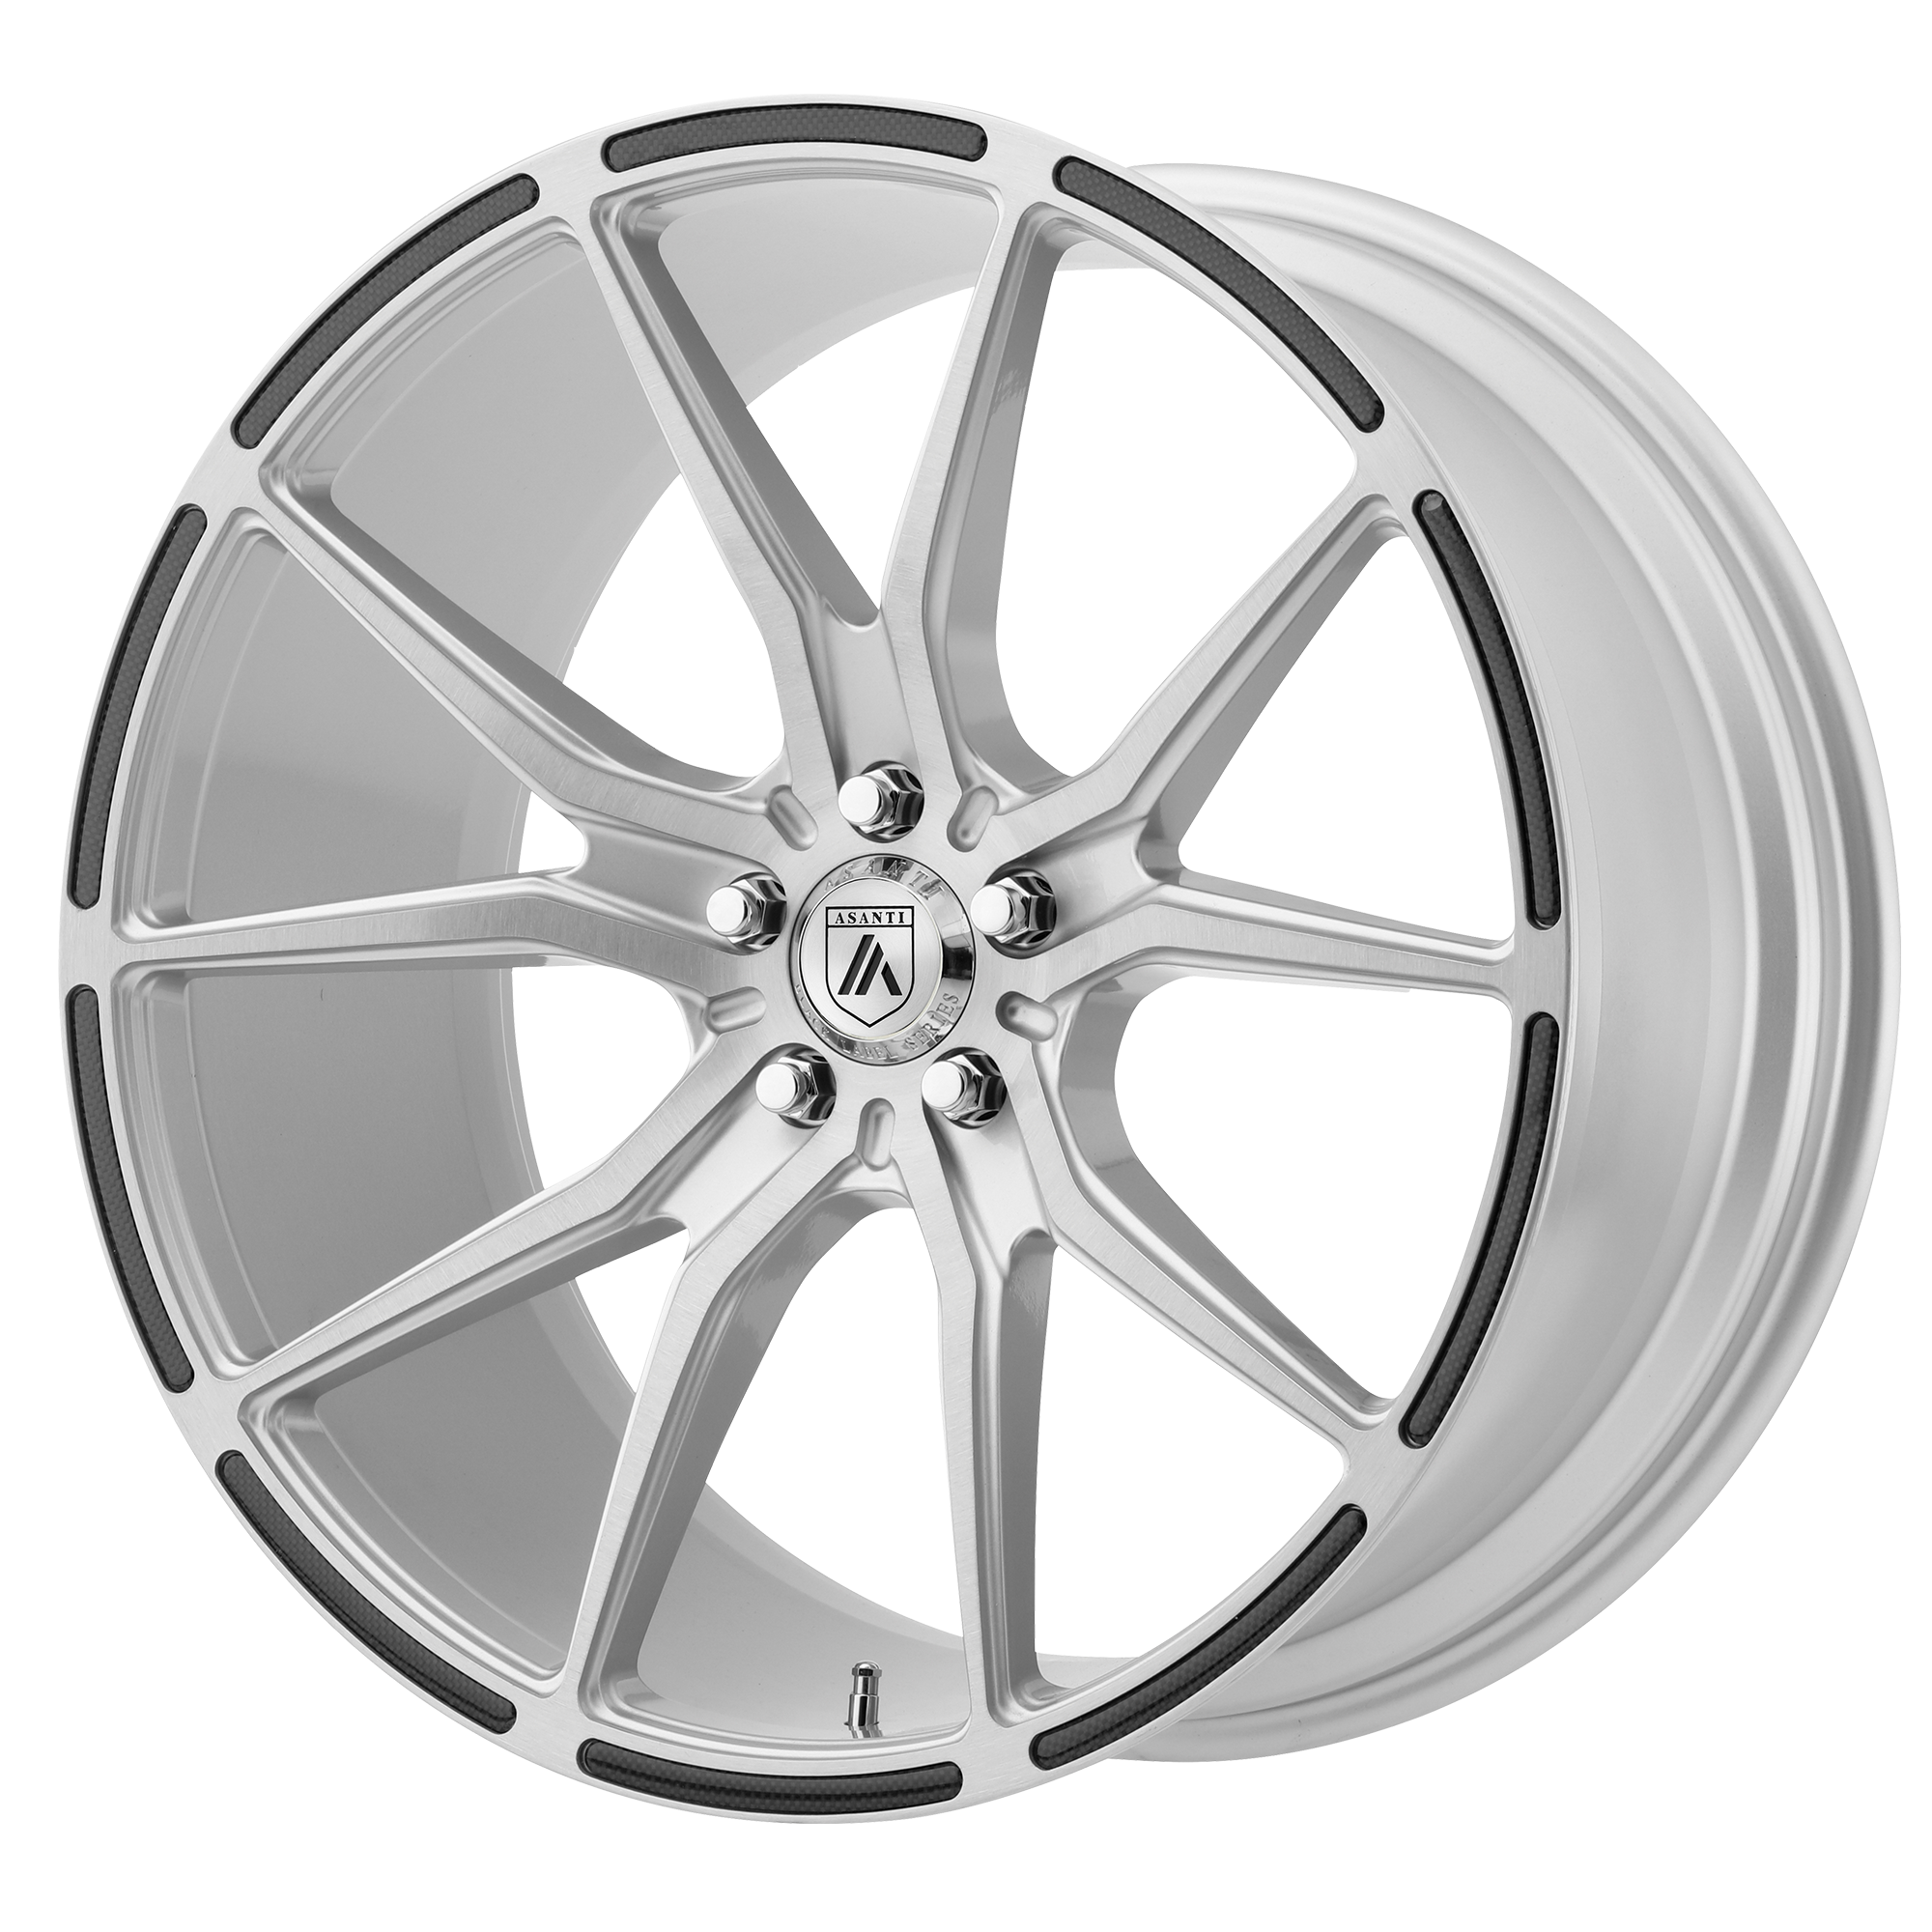 VEGA 20x10.5 Blank BRUSHED SILVER W/ CARBON FIBER INSERTS (20.00 - 37.00 mm) - Tires and Engine Performance